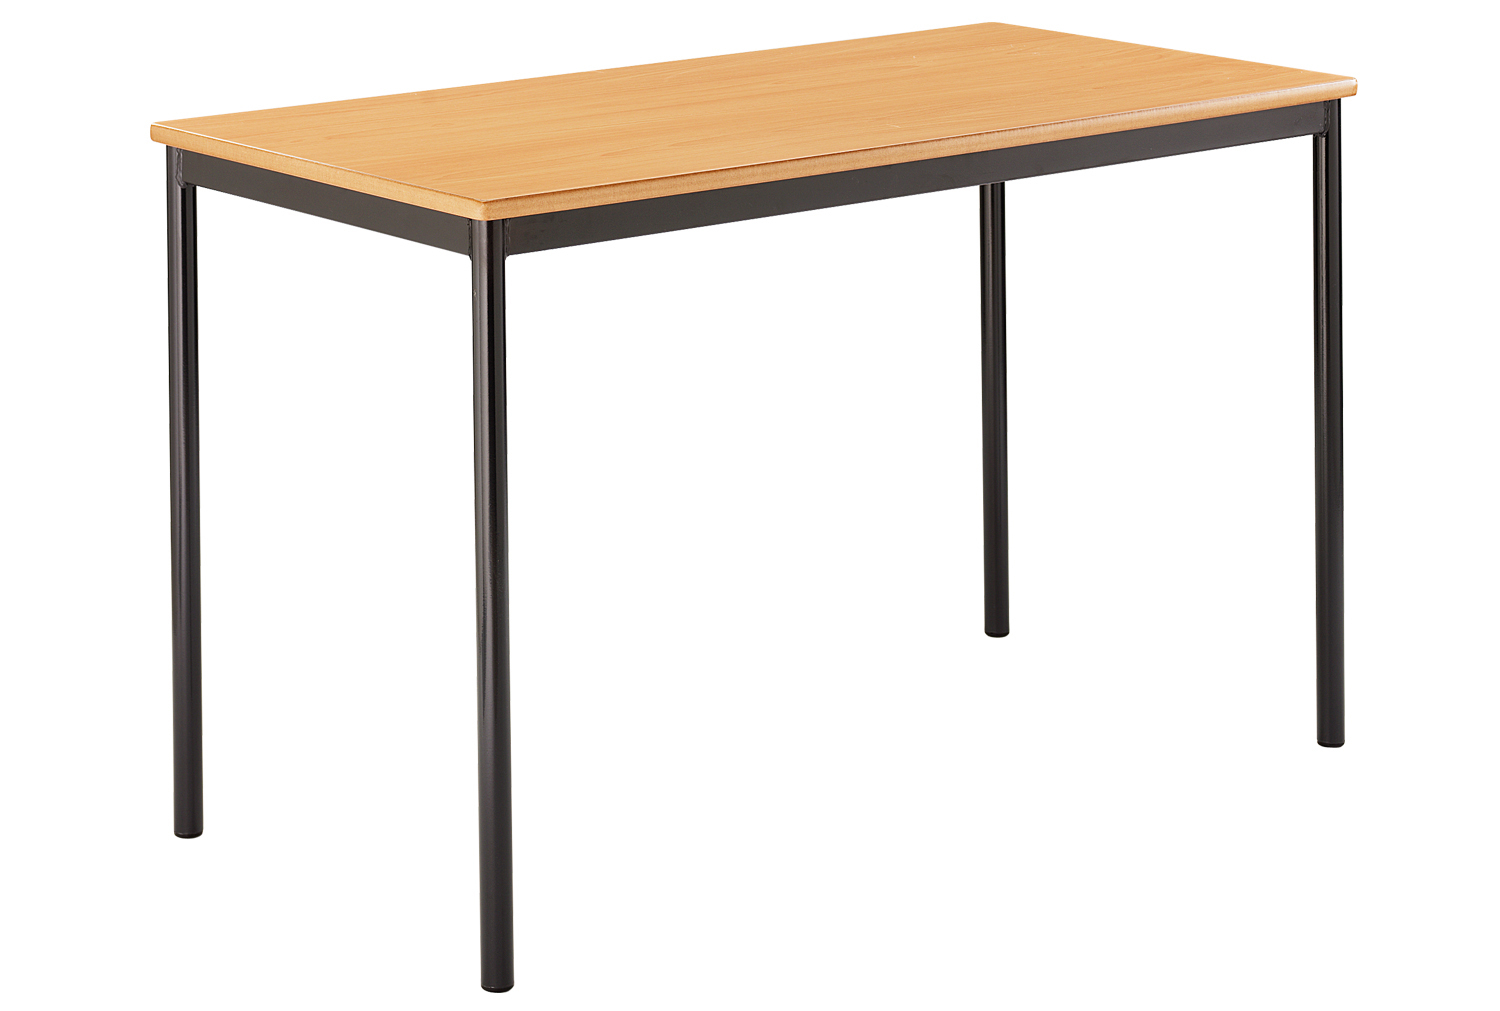 Qty 4 - Rectangular Fully Welded Classroom Tables 14+ Years, 110wx55dx76h (cm), Charcoal Frame, Grey Top, ABS Beech Edge